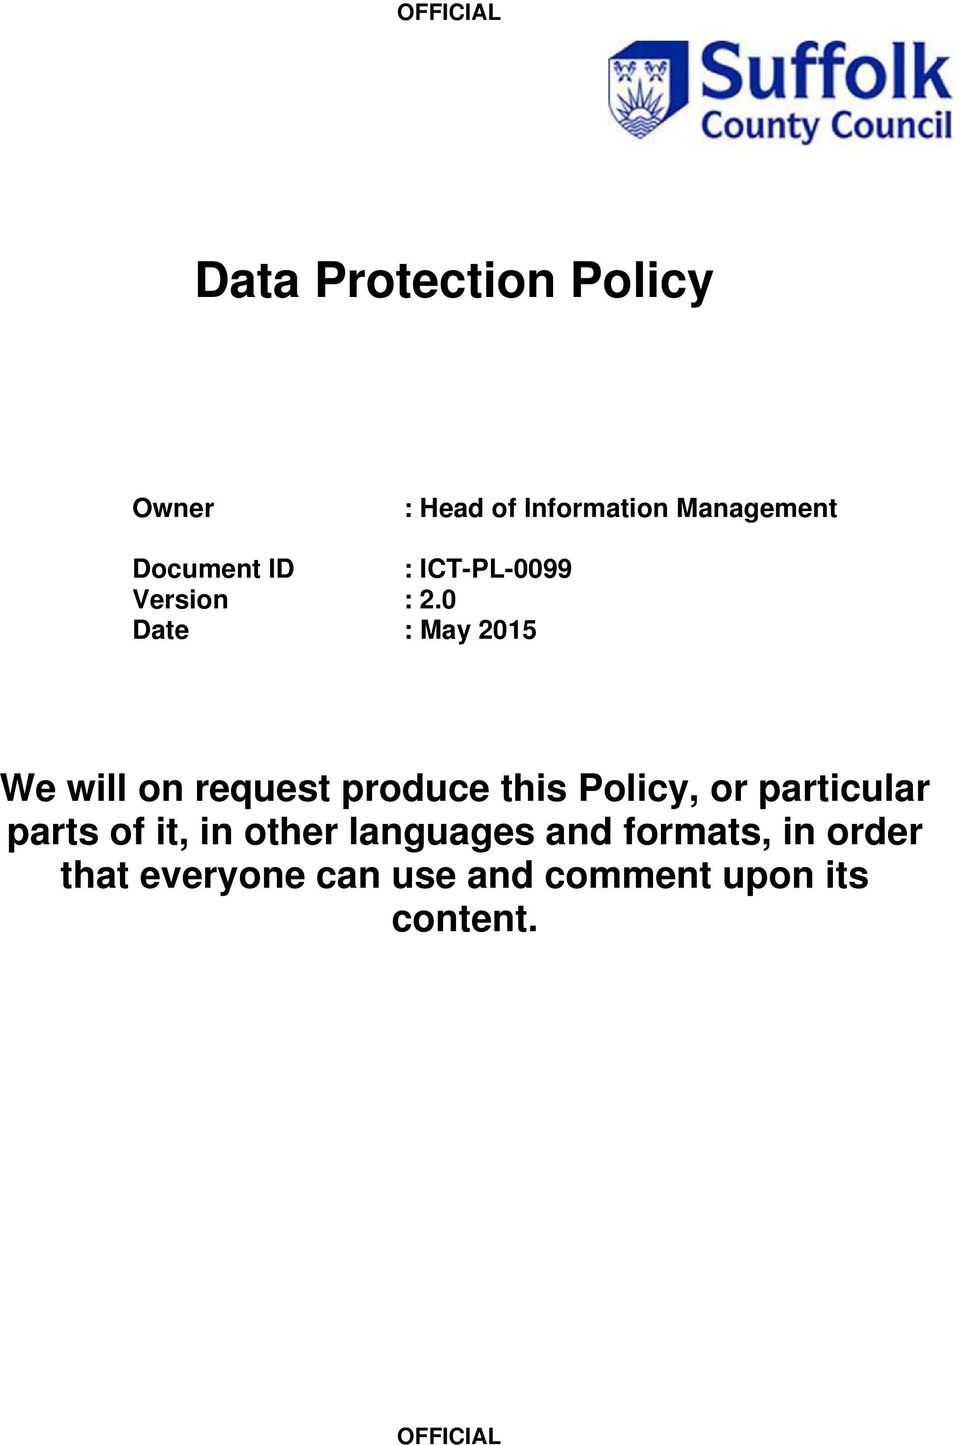 0 Date : May 2015 We will on request produce this Policy, or